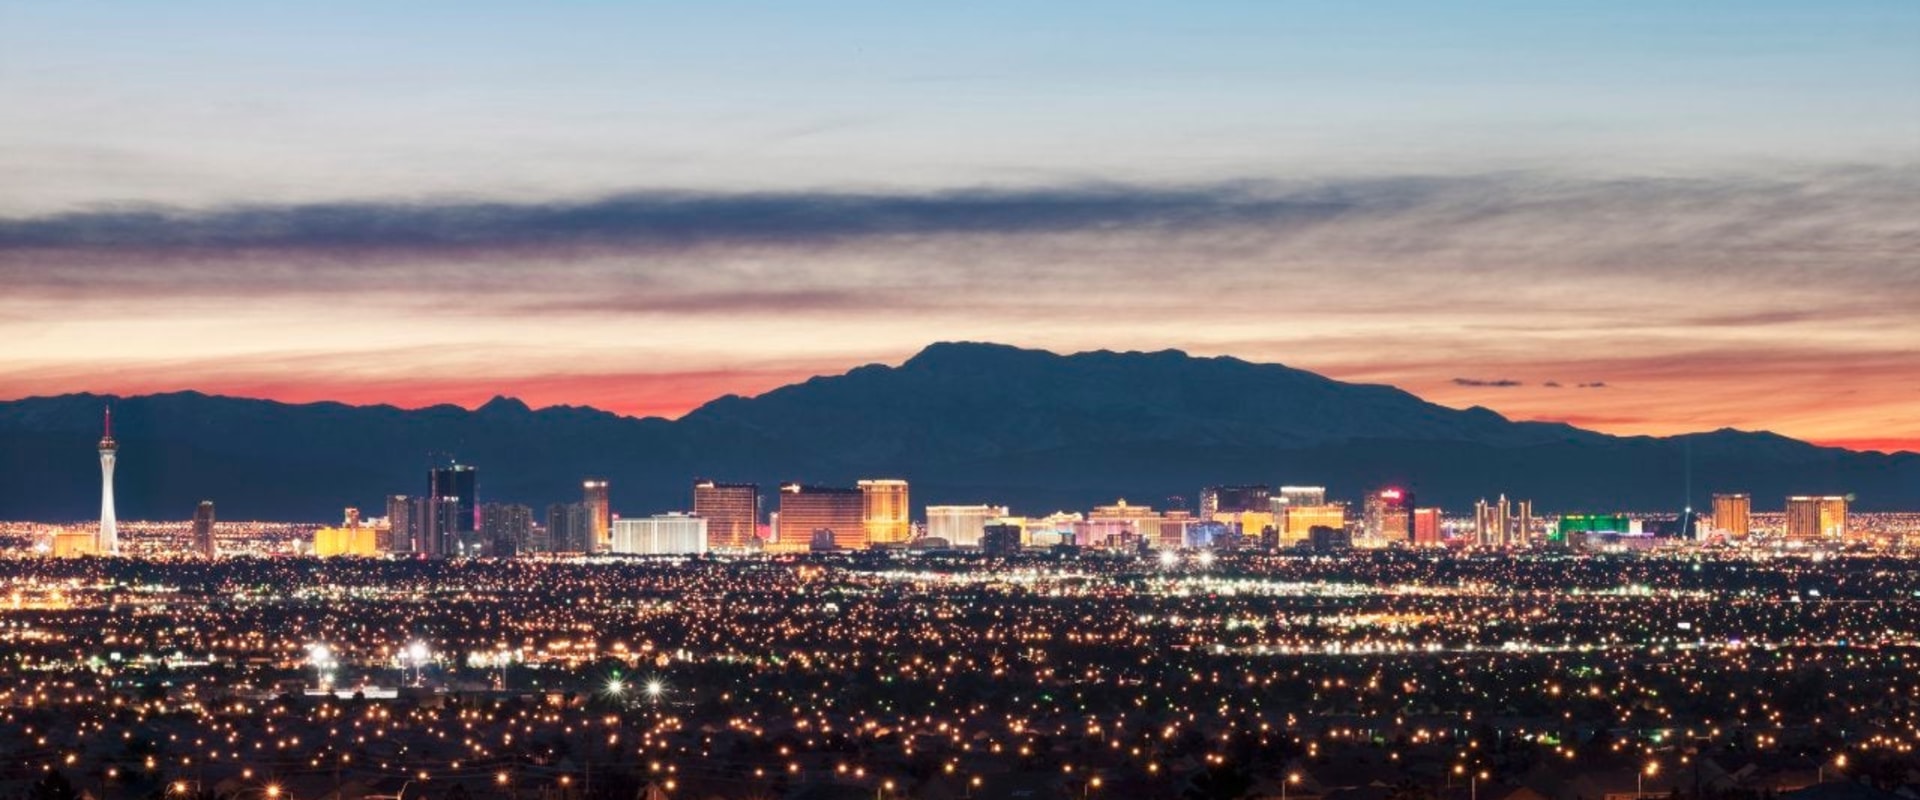 Buying a Home in Las Vegas? Here's What to Expect from a Realtor